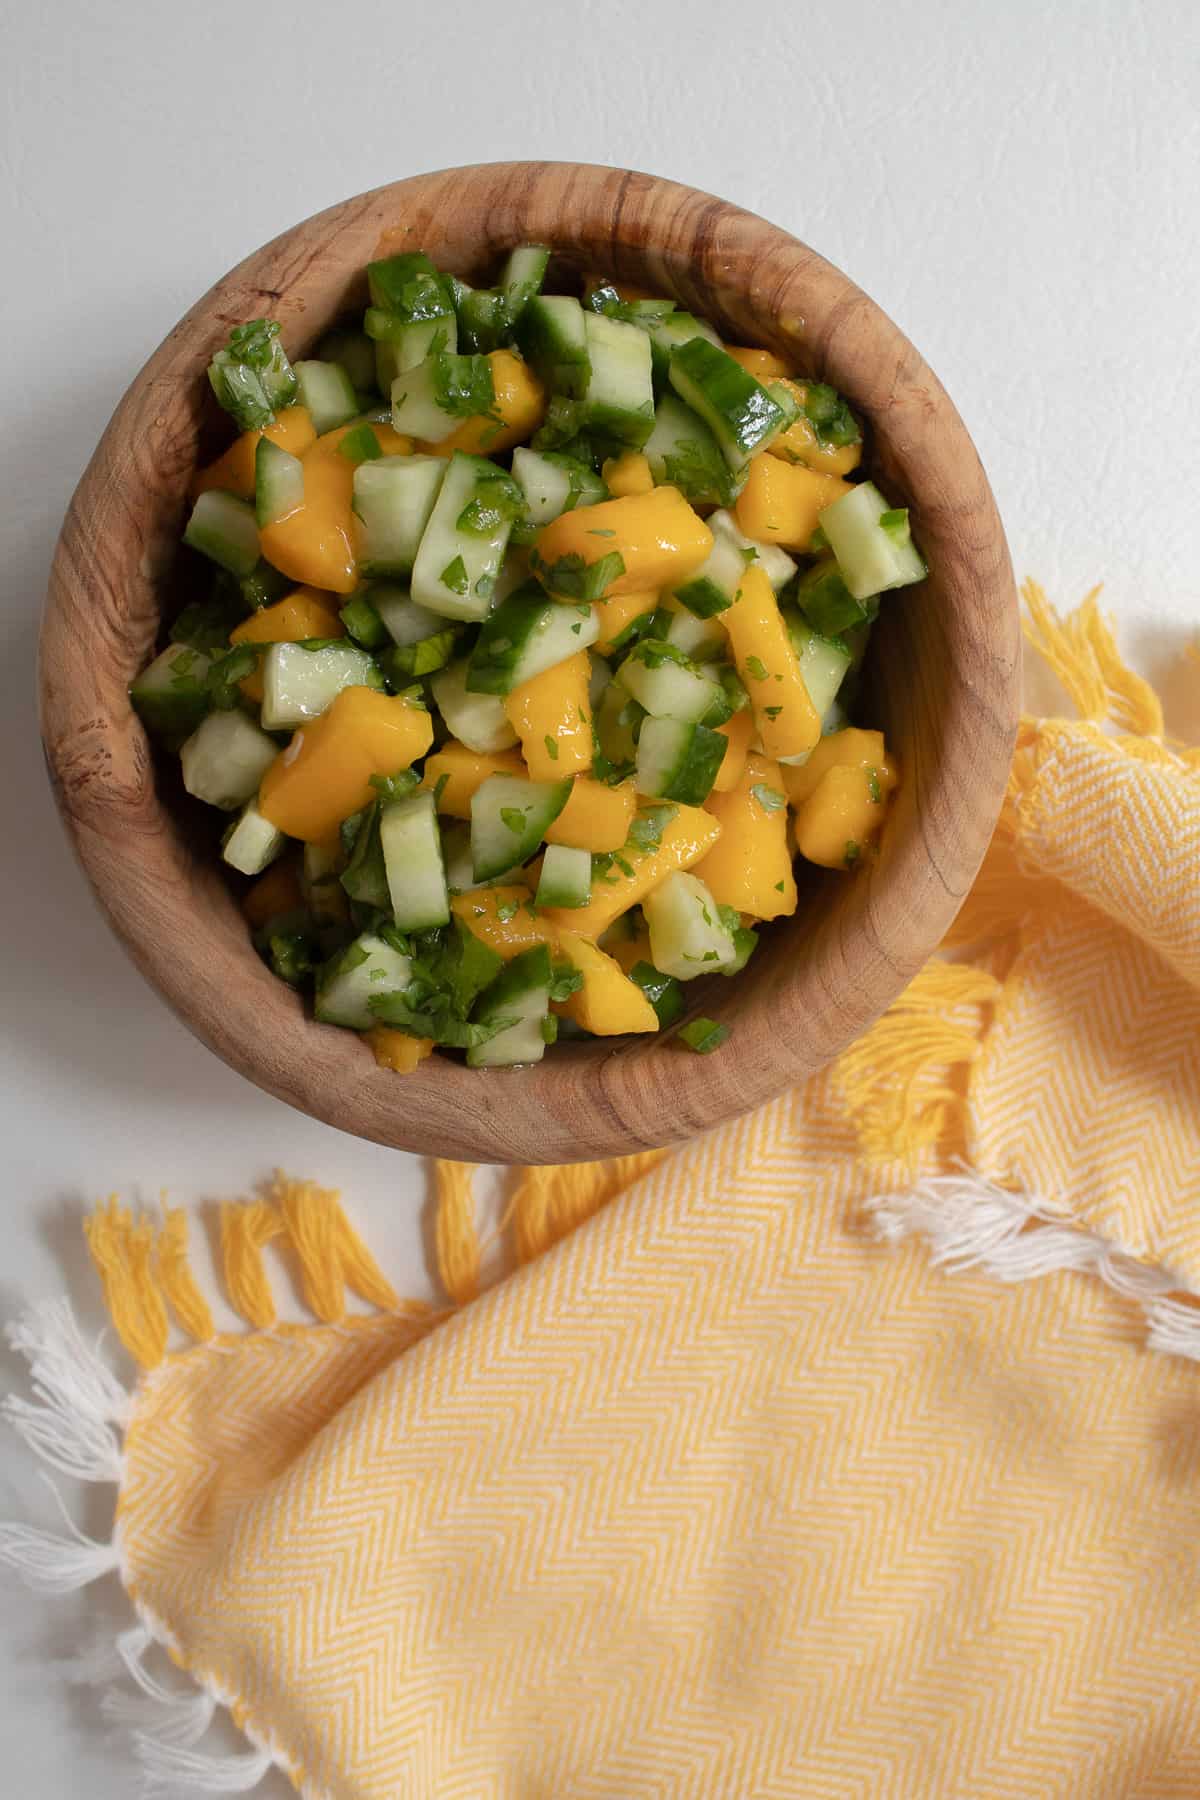 The finished mango cucumber salad is served in a small wooden bowl next to a pale yellow napkin.